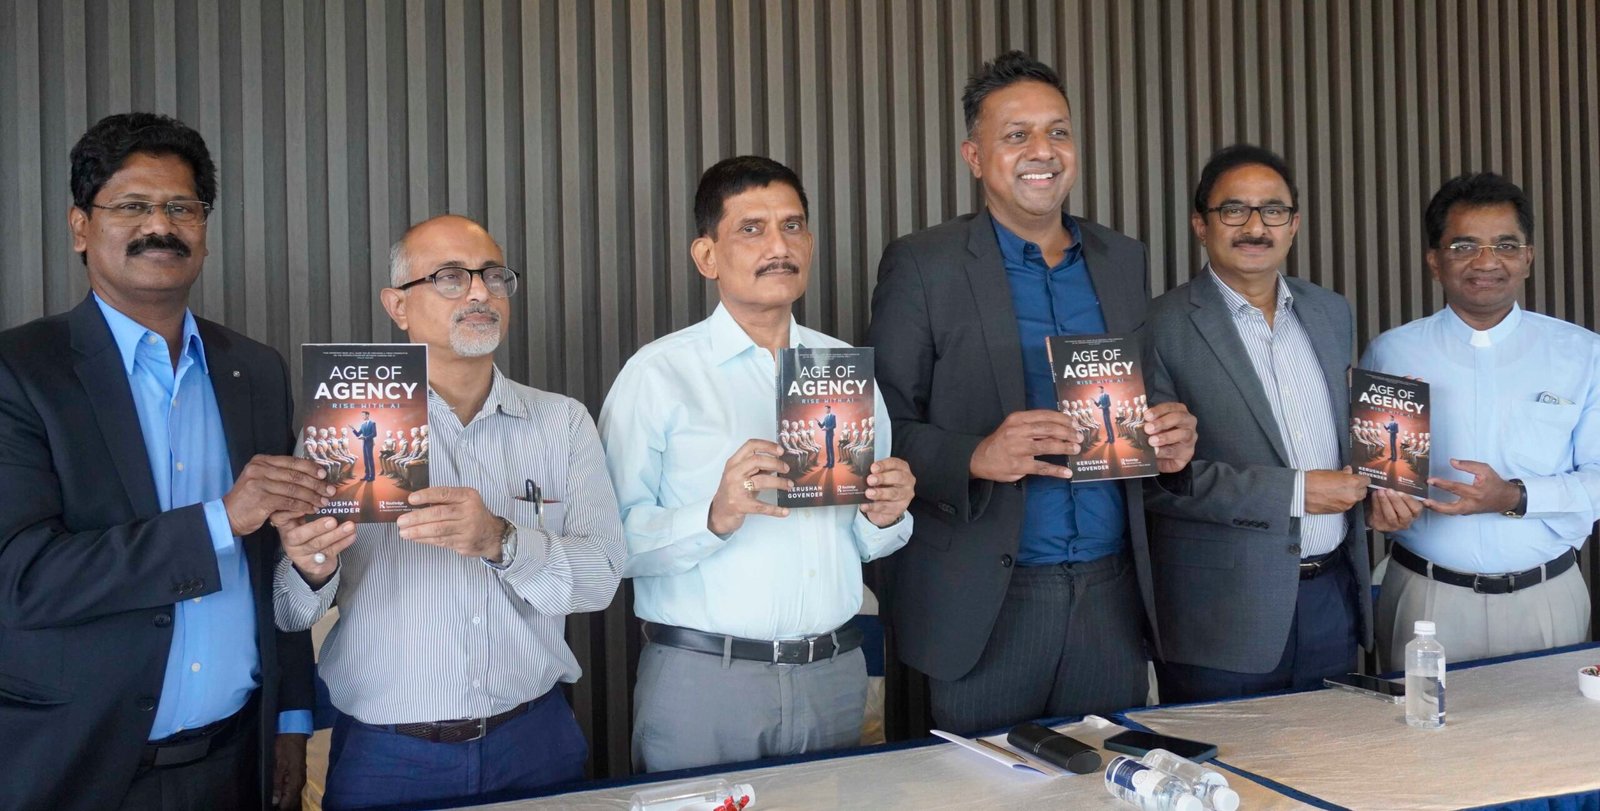 BALA REDDY_PROF NEGI__RP Thakur_Kerushan Govender_Bharani Kumar Aroll at the launch of the book AGE OF AGENCY RISE WITH AI authored by South Indian Origin South African pic 3